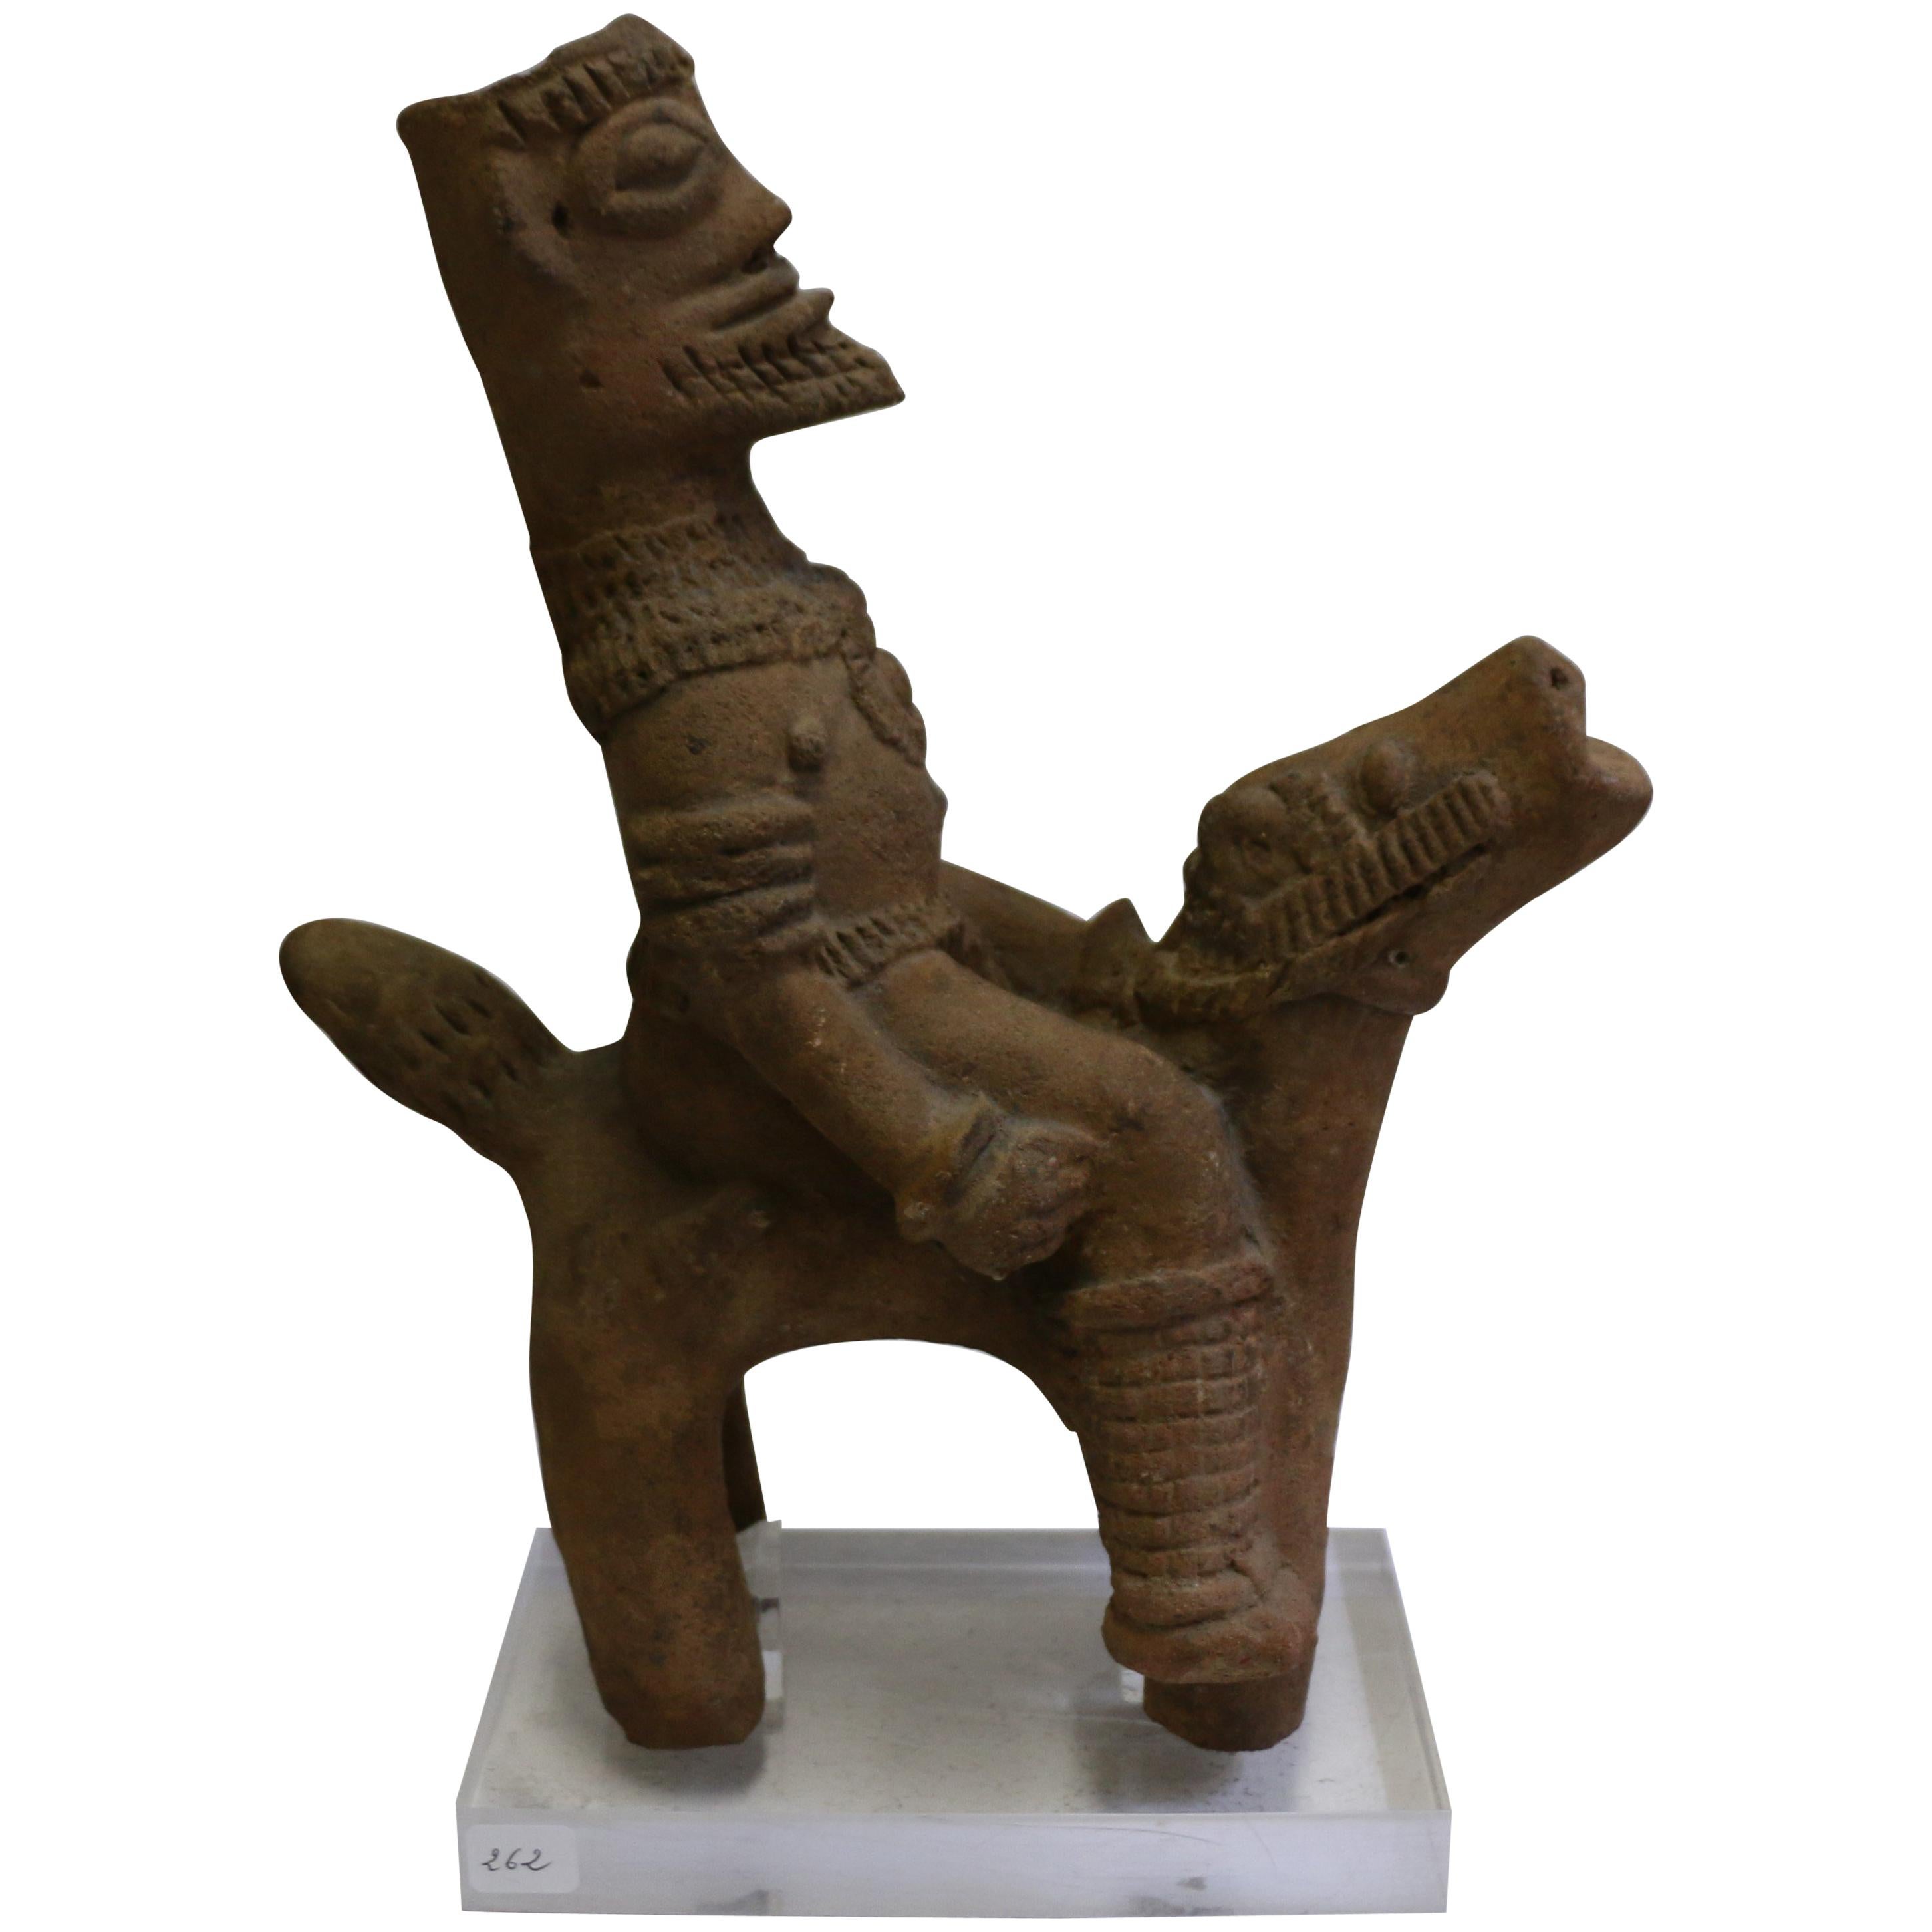 African Terracotta Equestrian Sculpture, Ghana, 14-15th AD Century For Sale